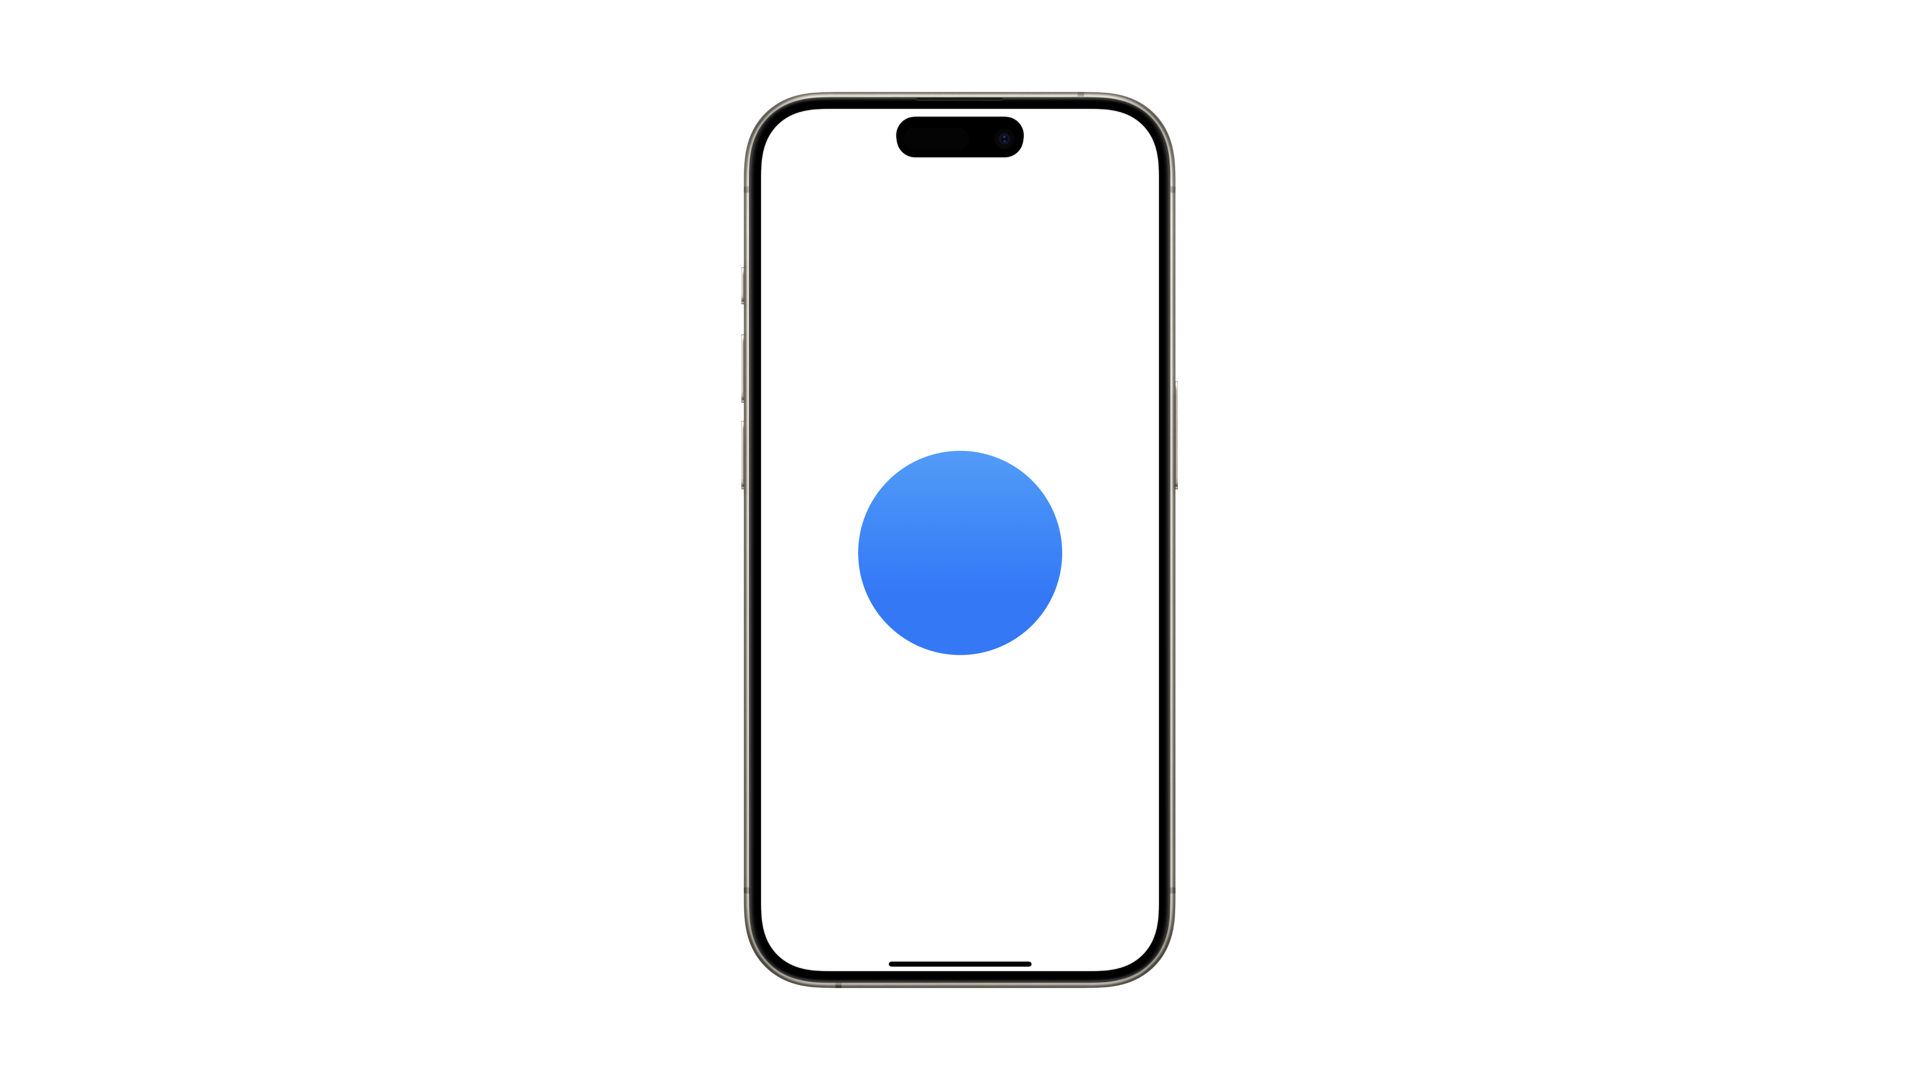 Frame of an iPhone with a circular shape in the middle filled with a top to bottom simple gradient 